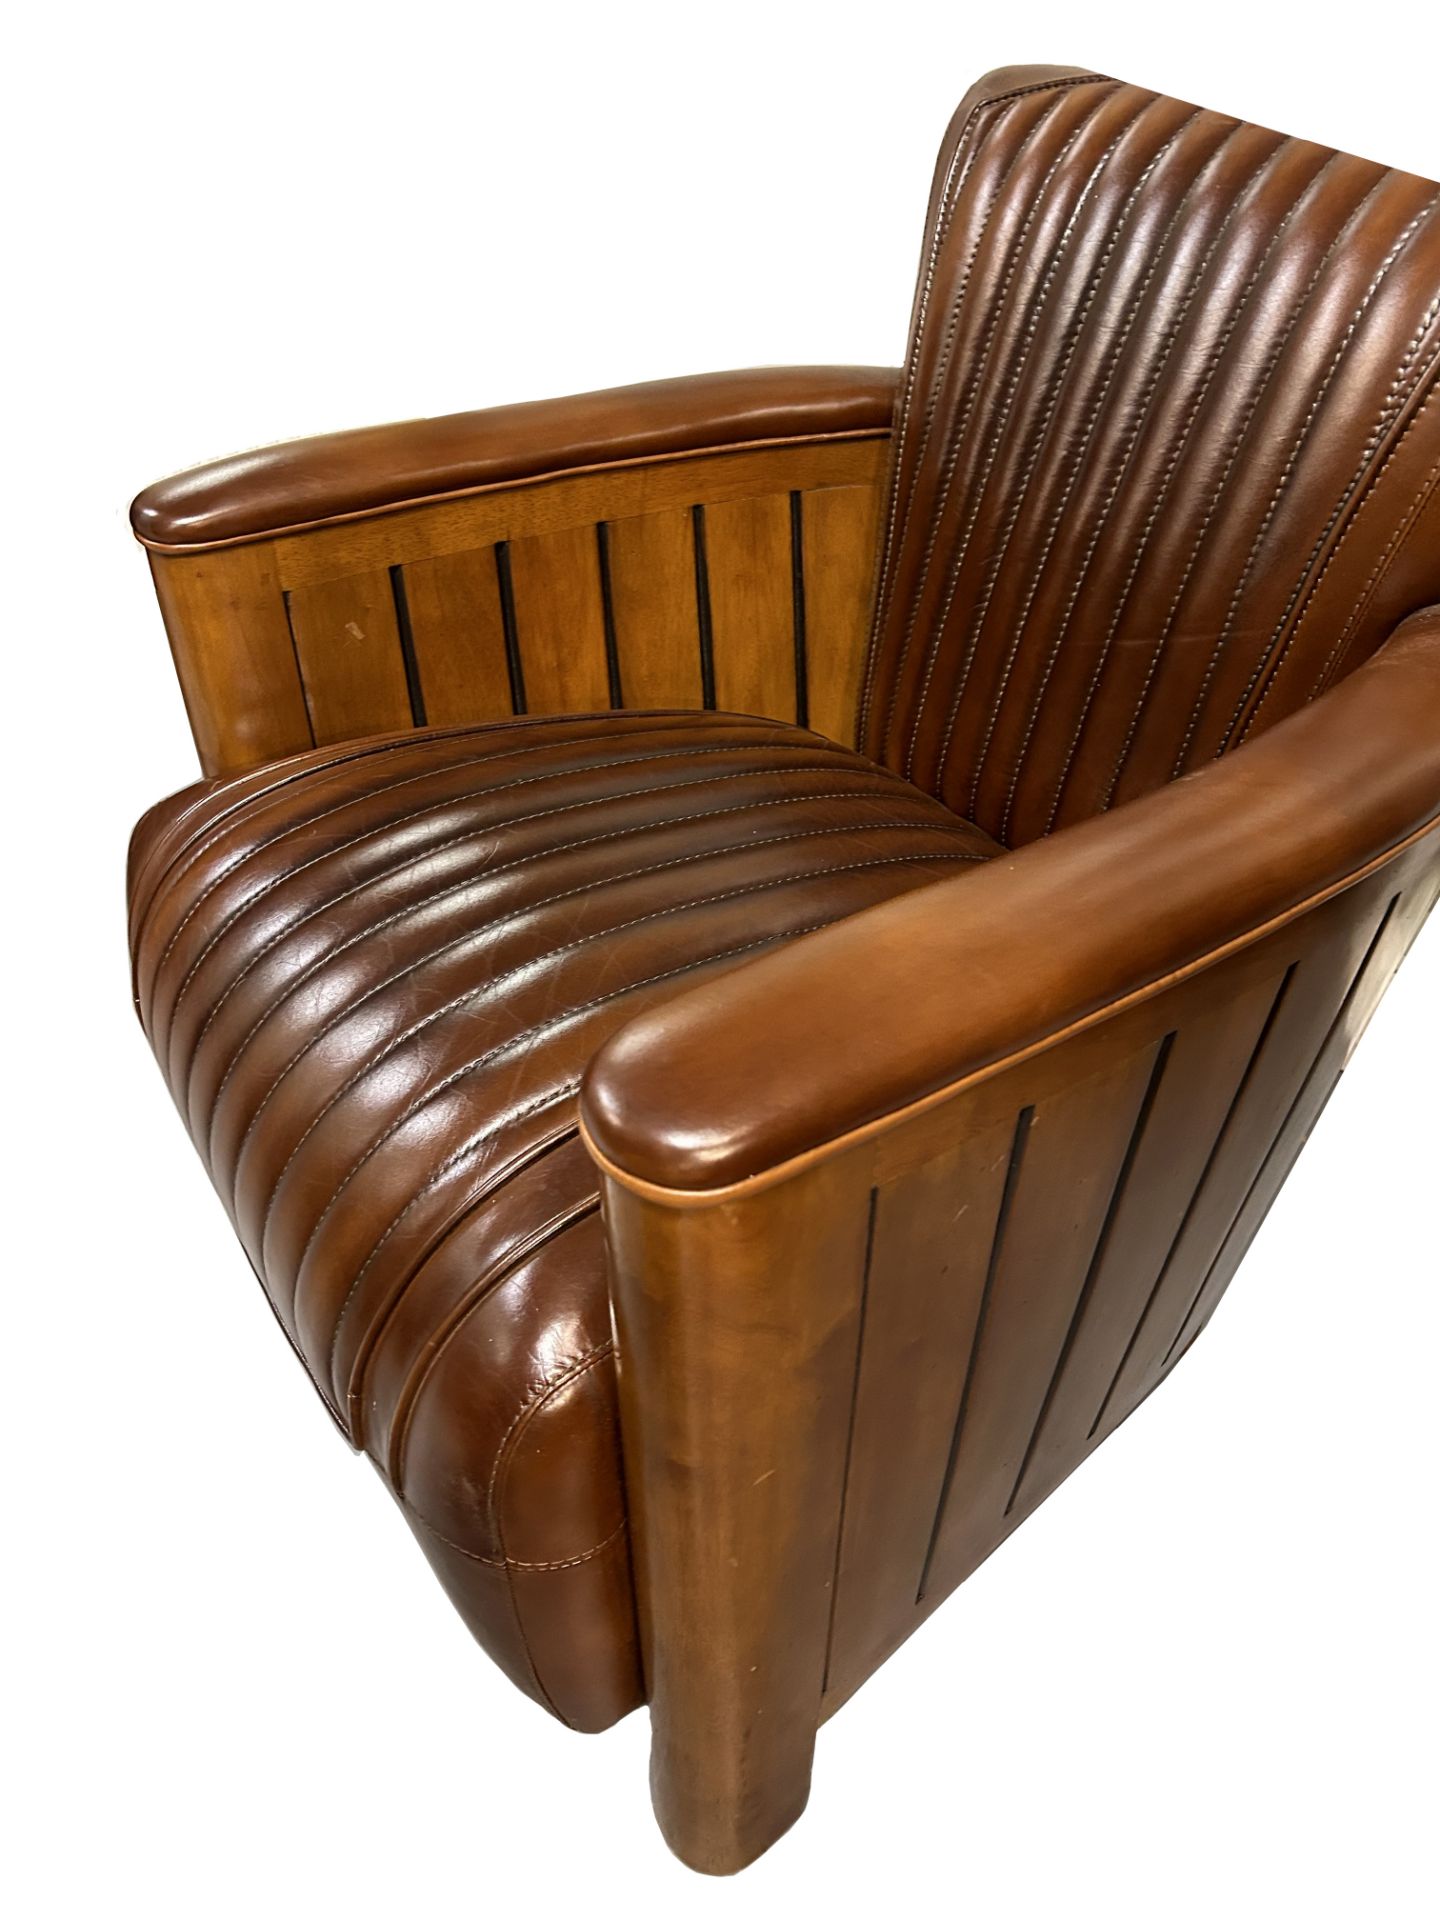 DESIGNER LEATHER V-SHAPED CLUB ARMCHAIR - Image 3 of 3